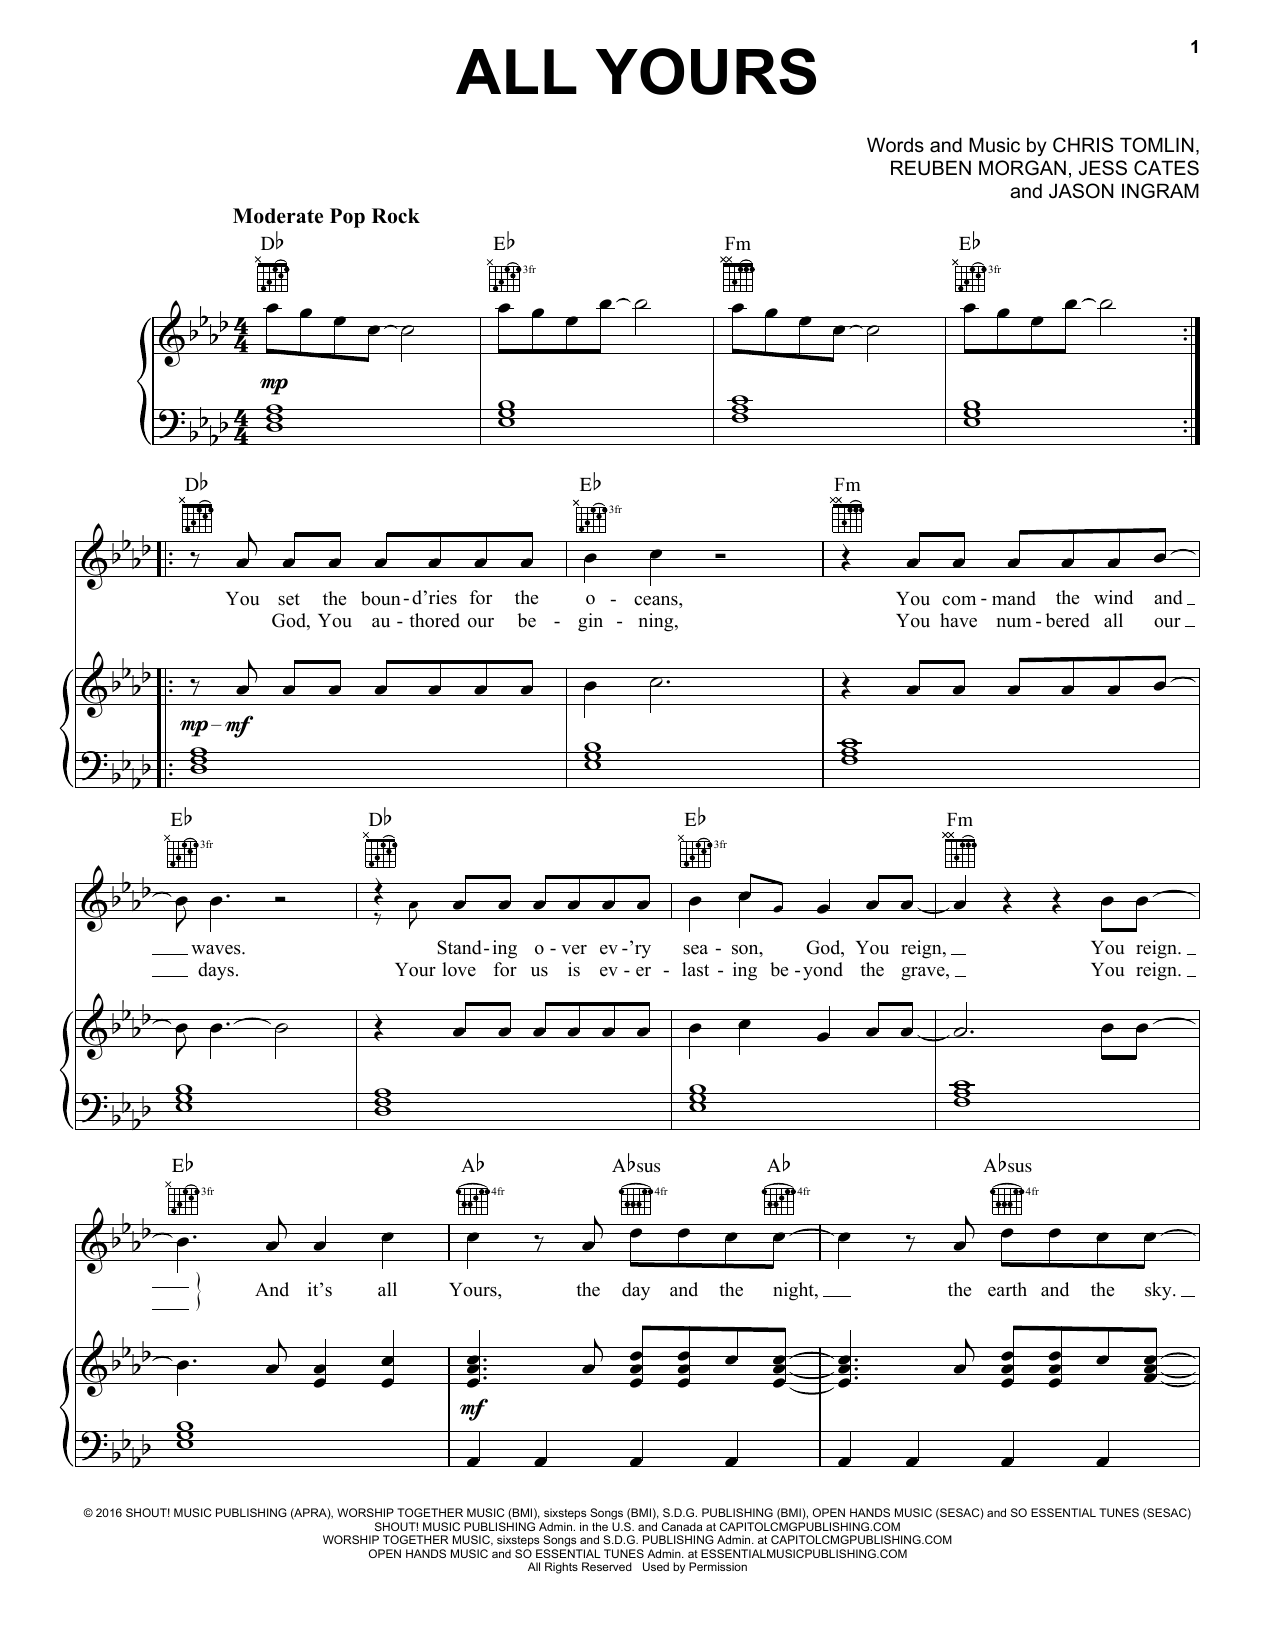 Download Chris Tomlin All Yours Sheet Music